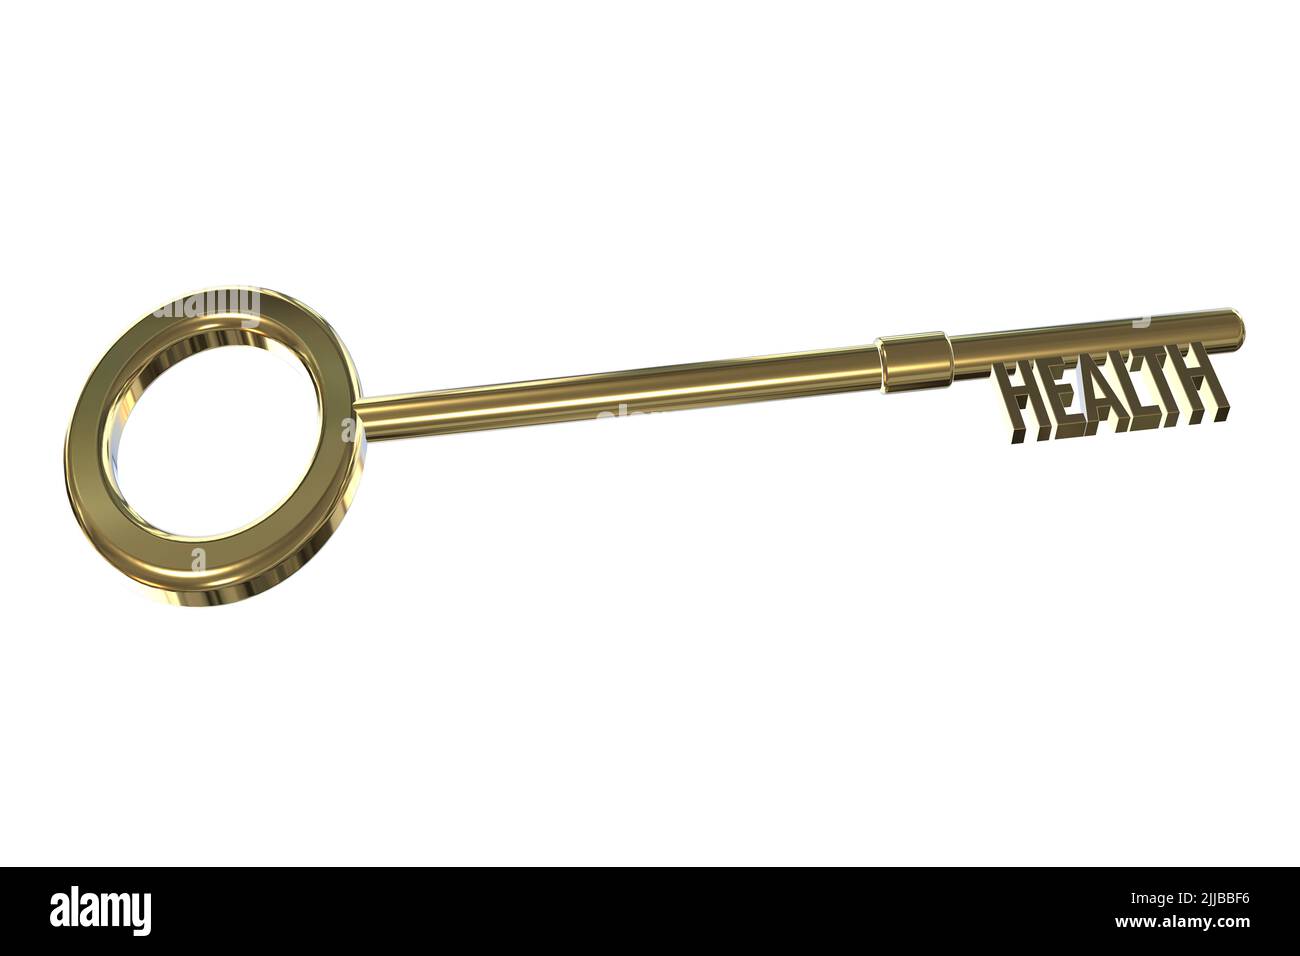 key to health concept health word incorporated in a gold 3D key cut out isolated on a white background Stock Photo